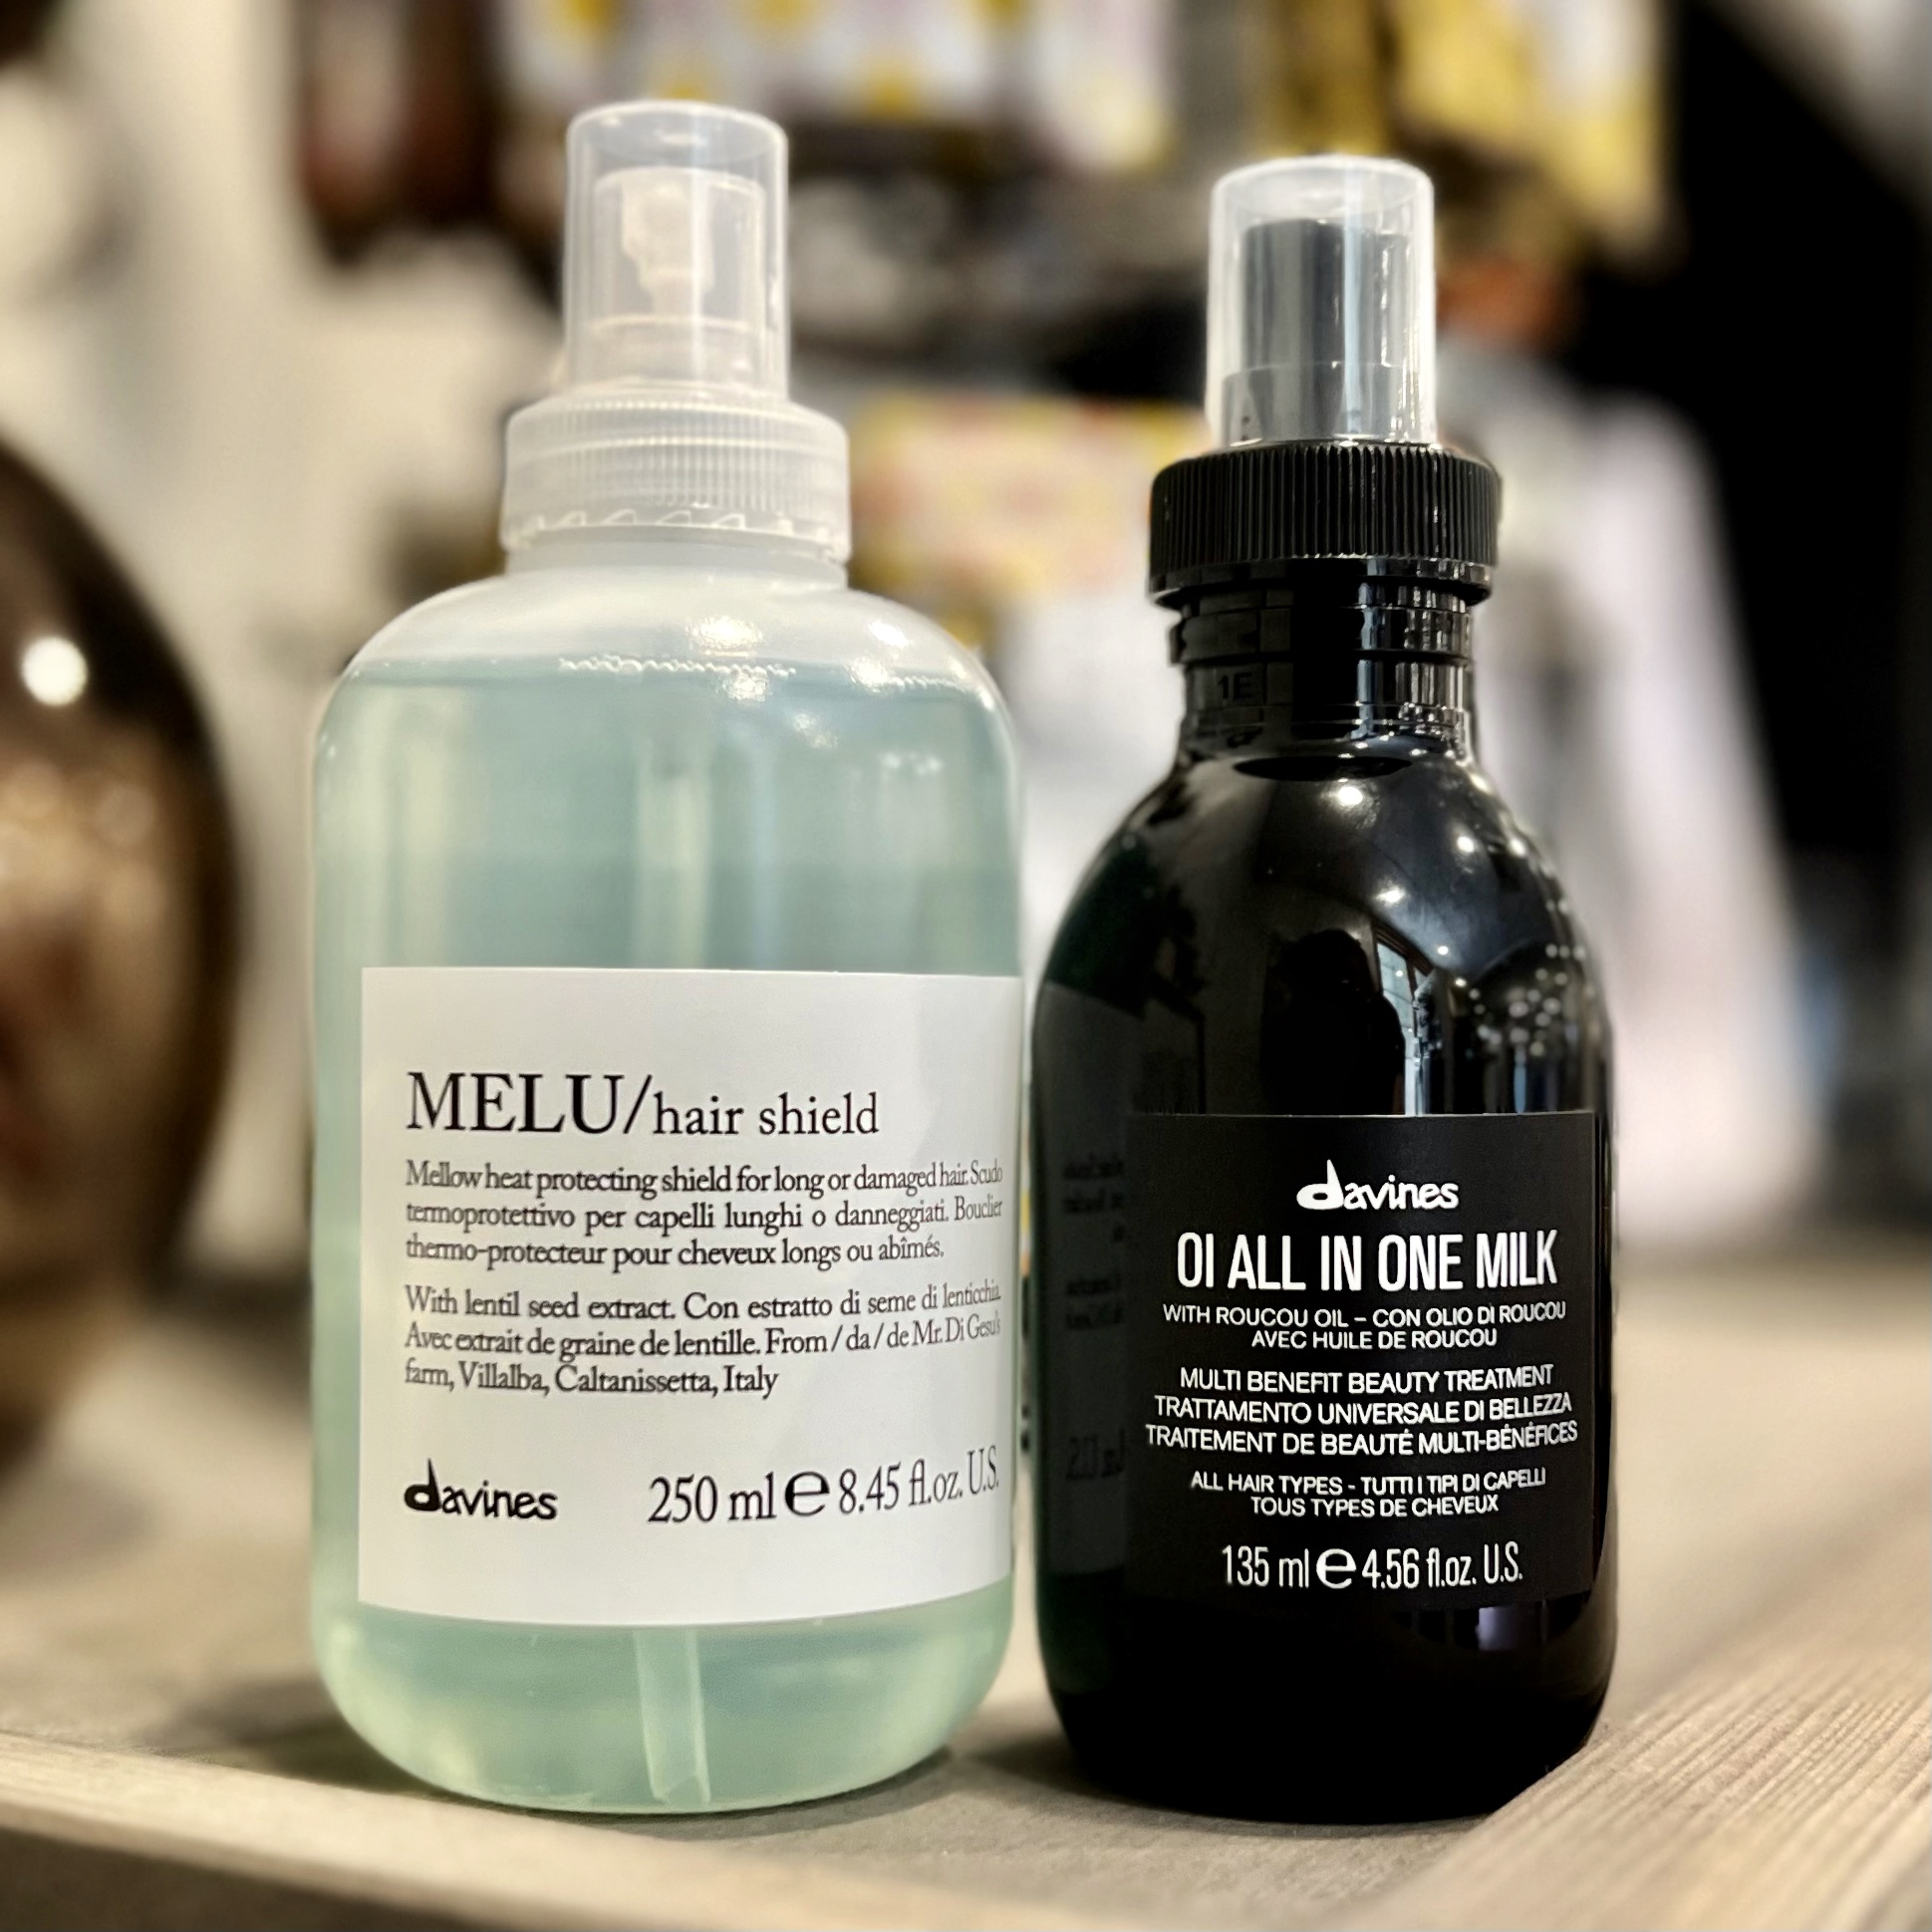 Davines Melu Hair Shield and Oi All In One Milk